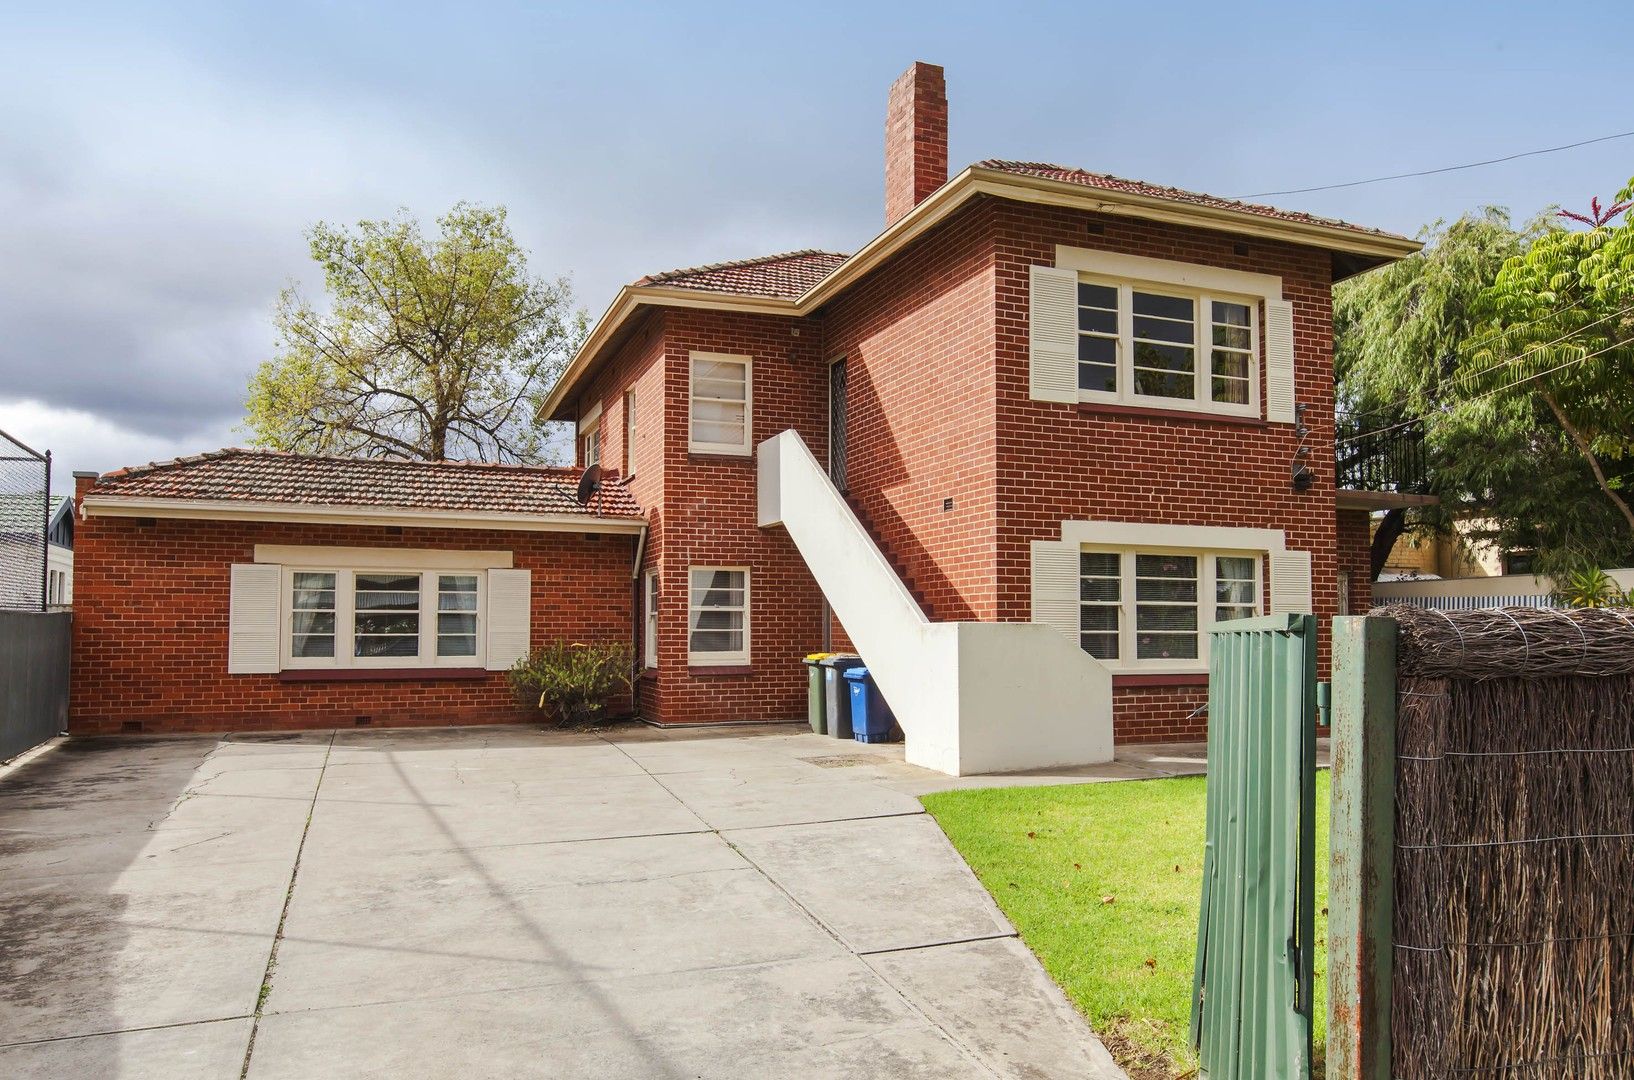 3 bedrooms Apartment / Unit / Flat in 1/5 Gully Street HYDE PARK SA, 5061